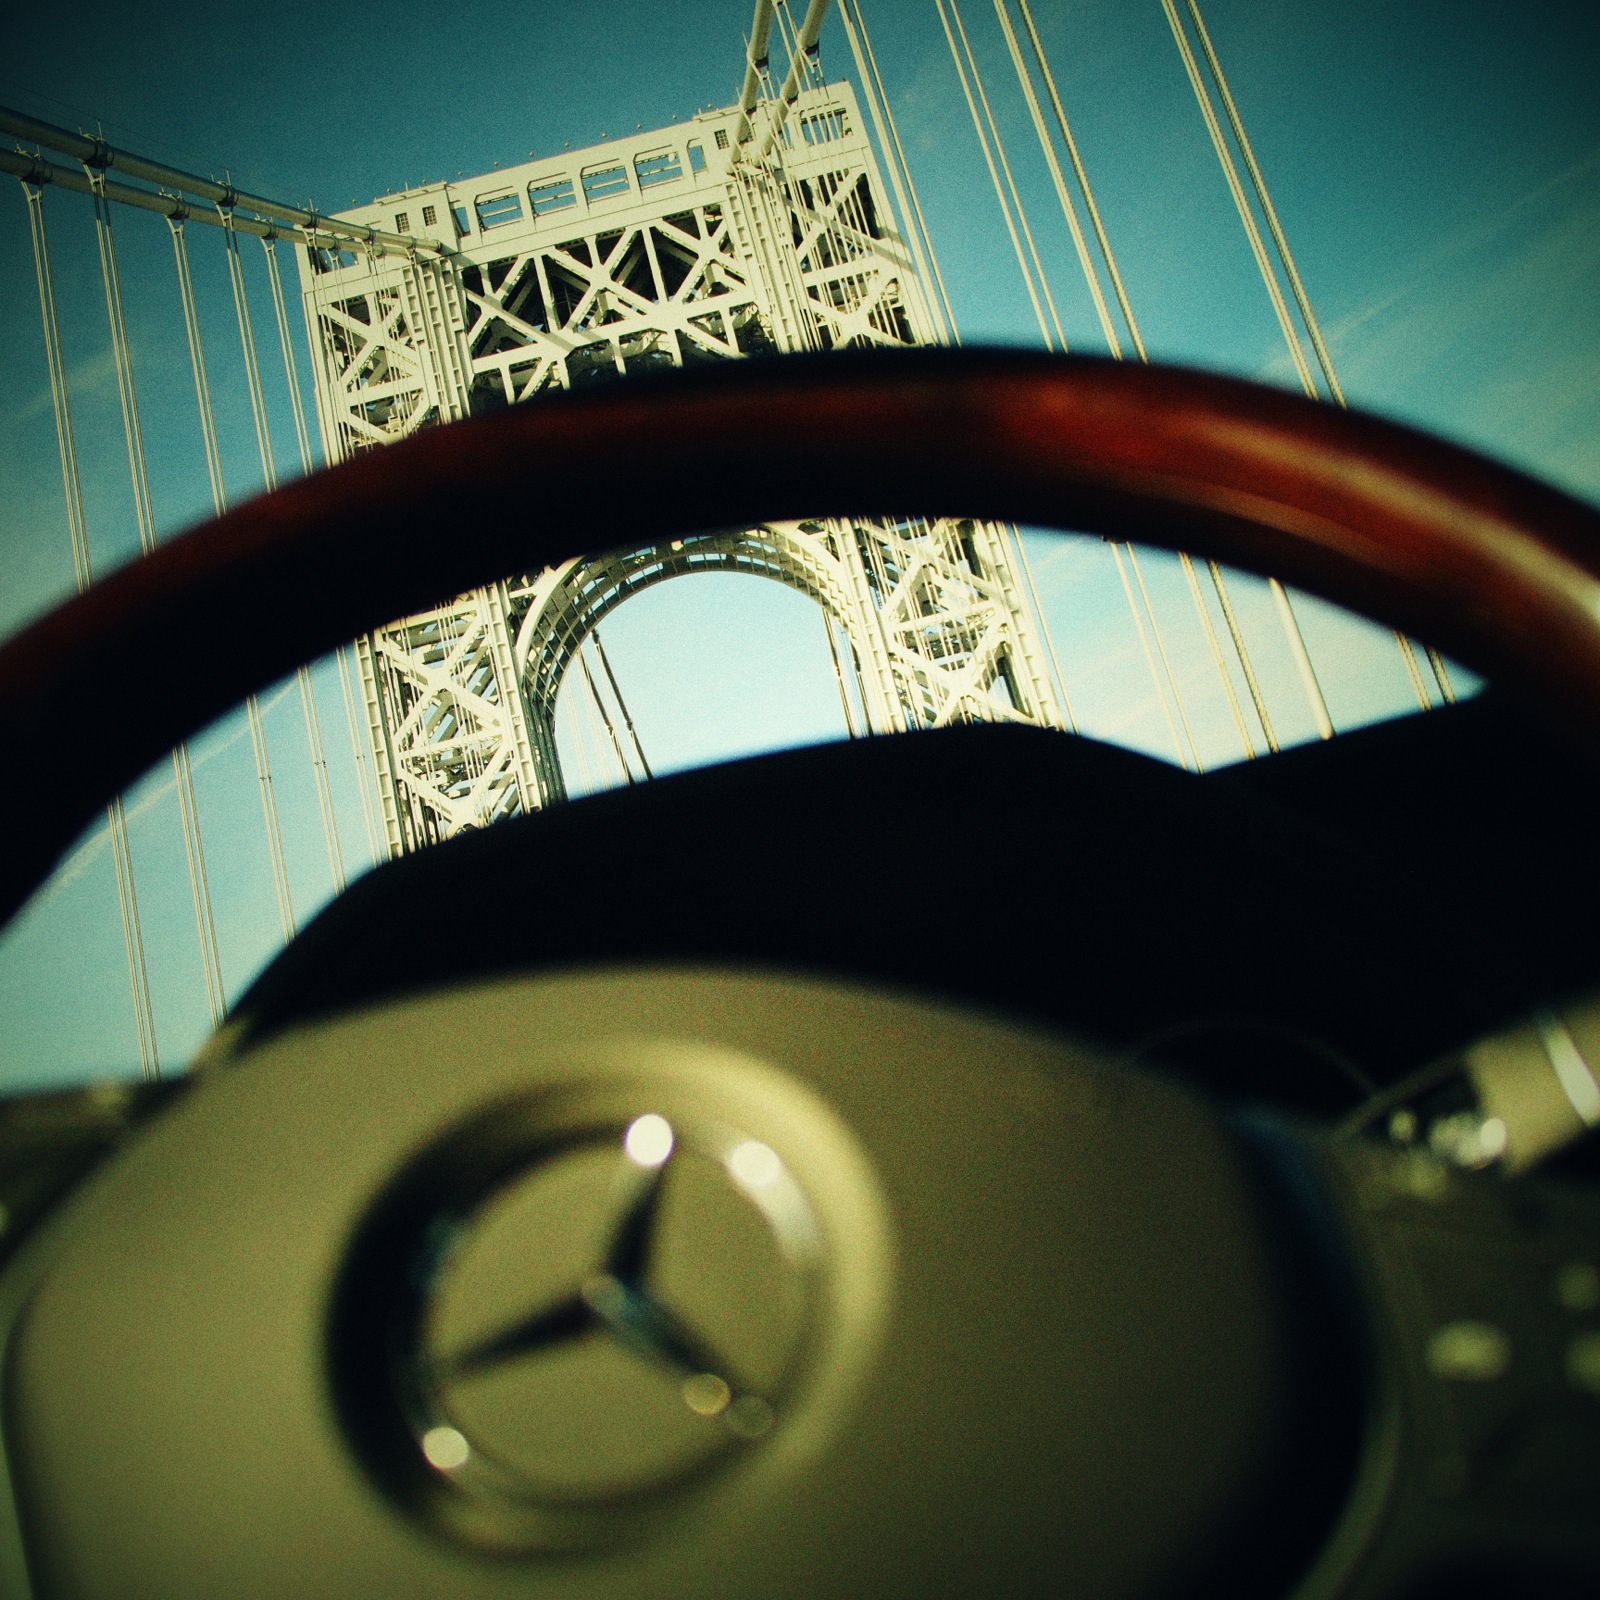 Mercedes-Benz photo in New York going over the George Washington bridge, shot on a Micro four thirds camera